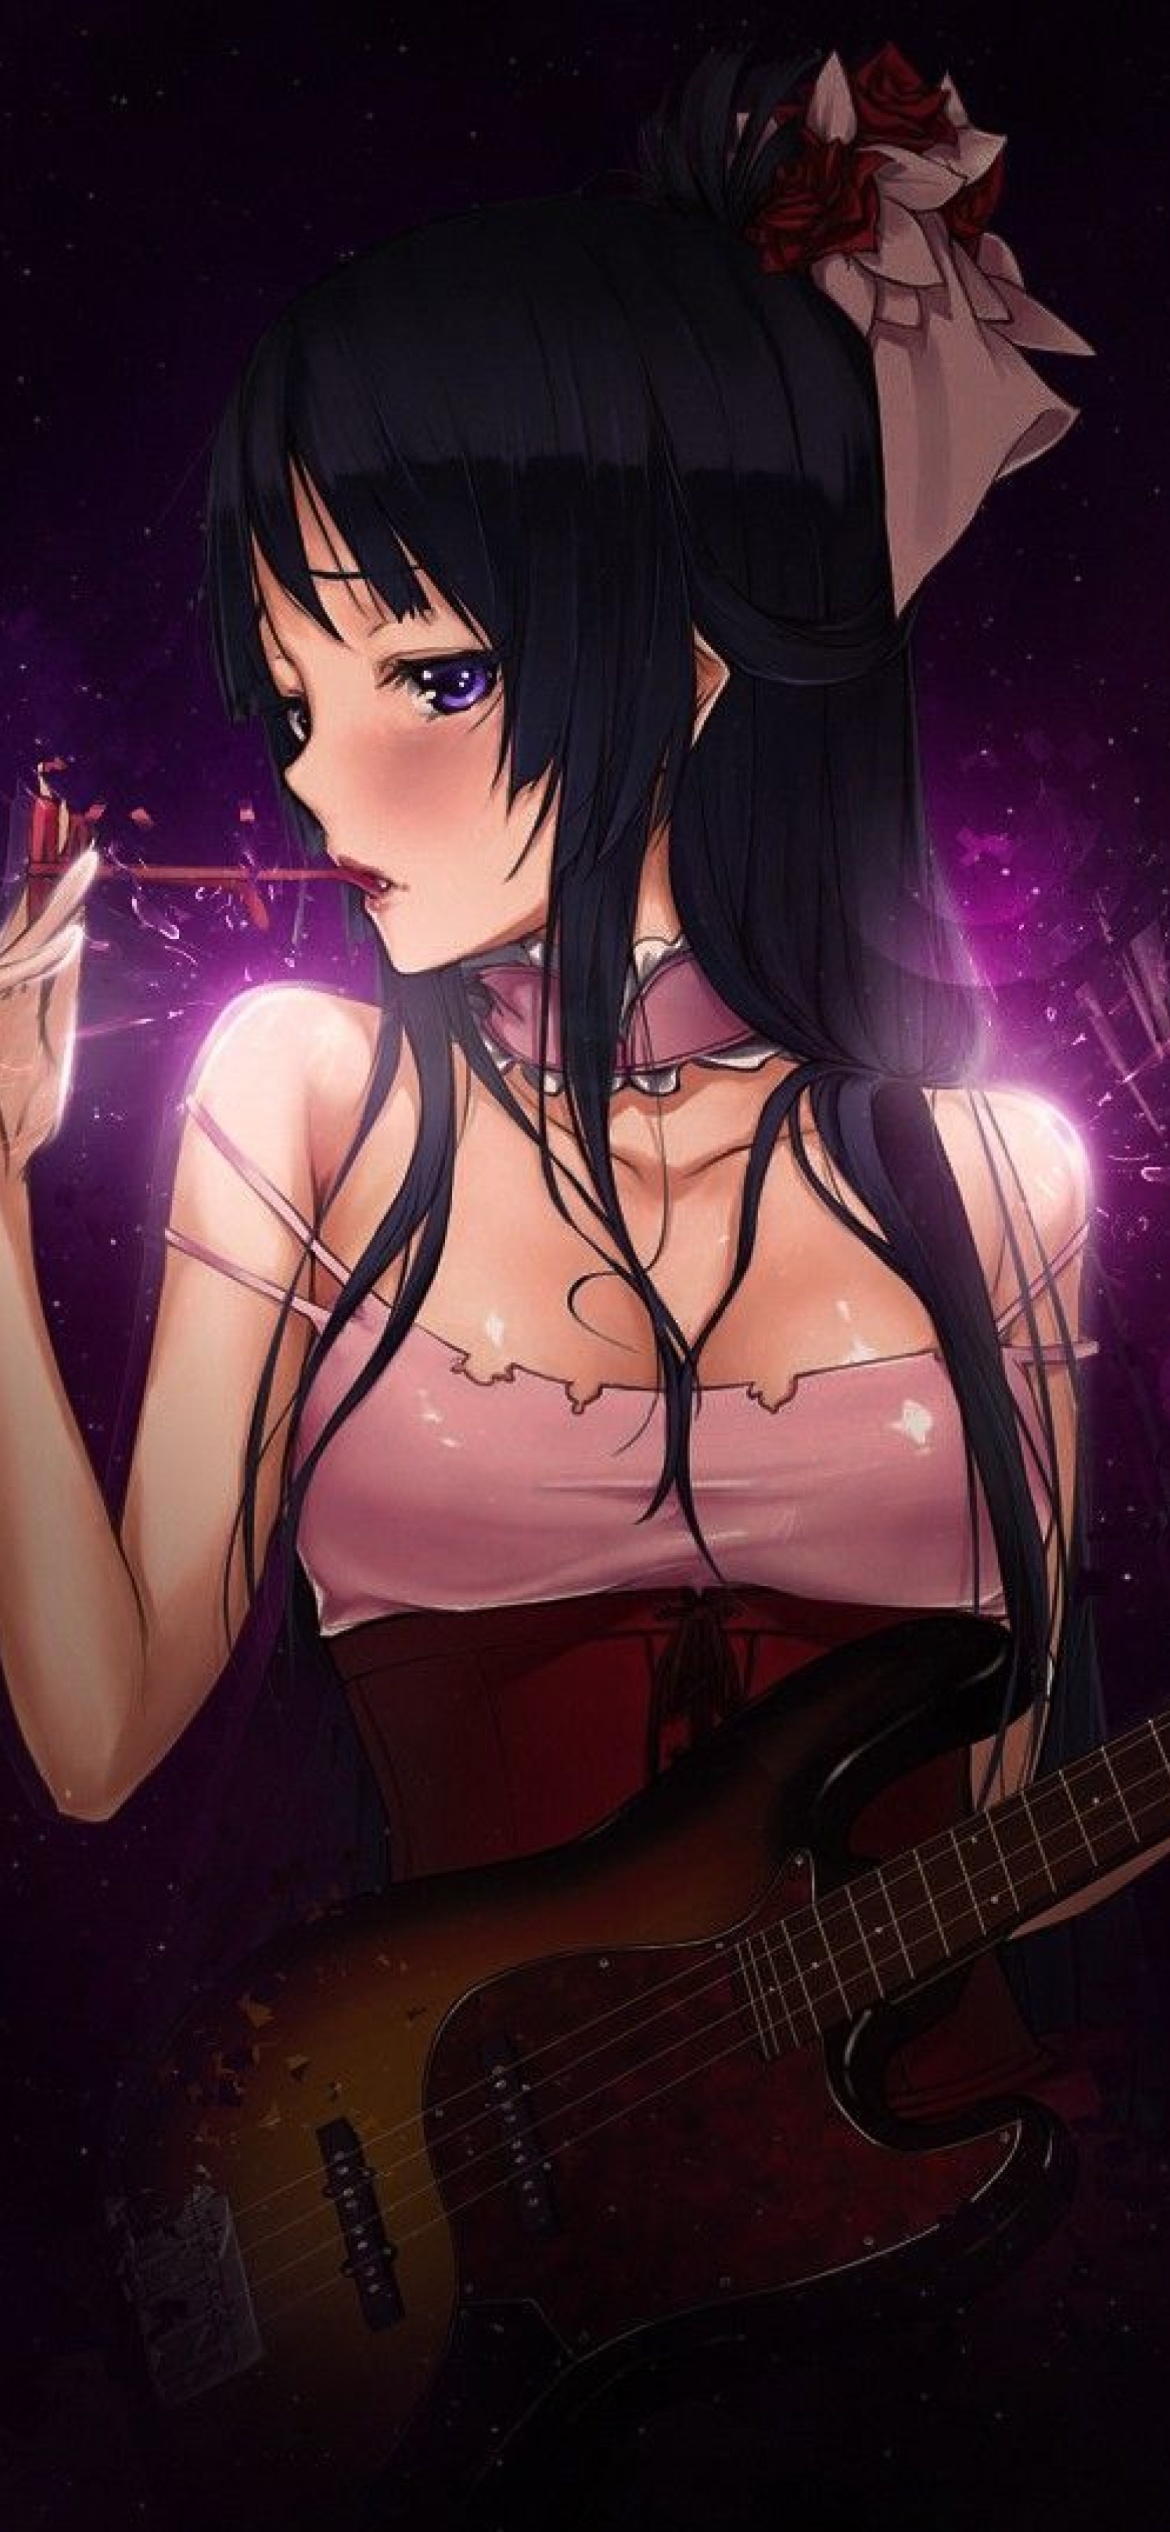 Anime Girl with Guitar wallpaper 1170x2532